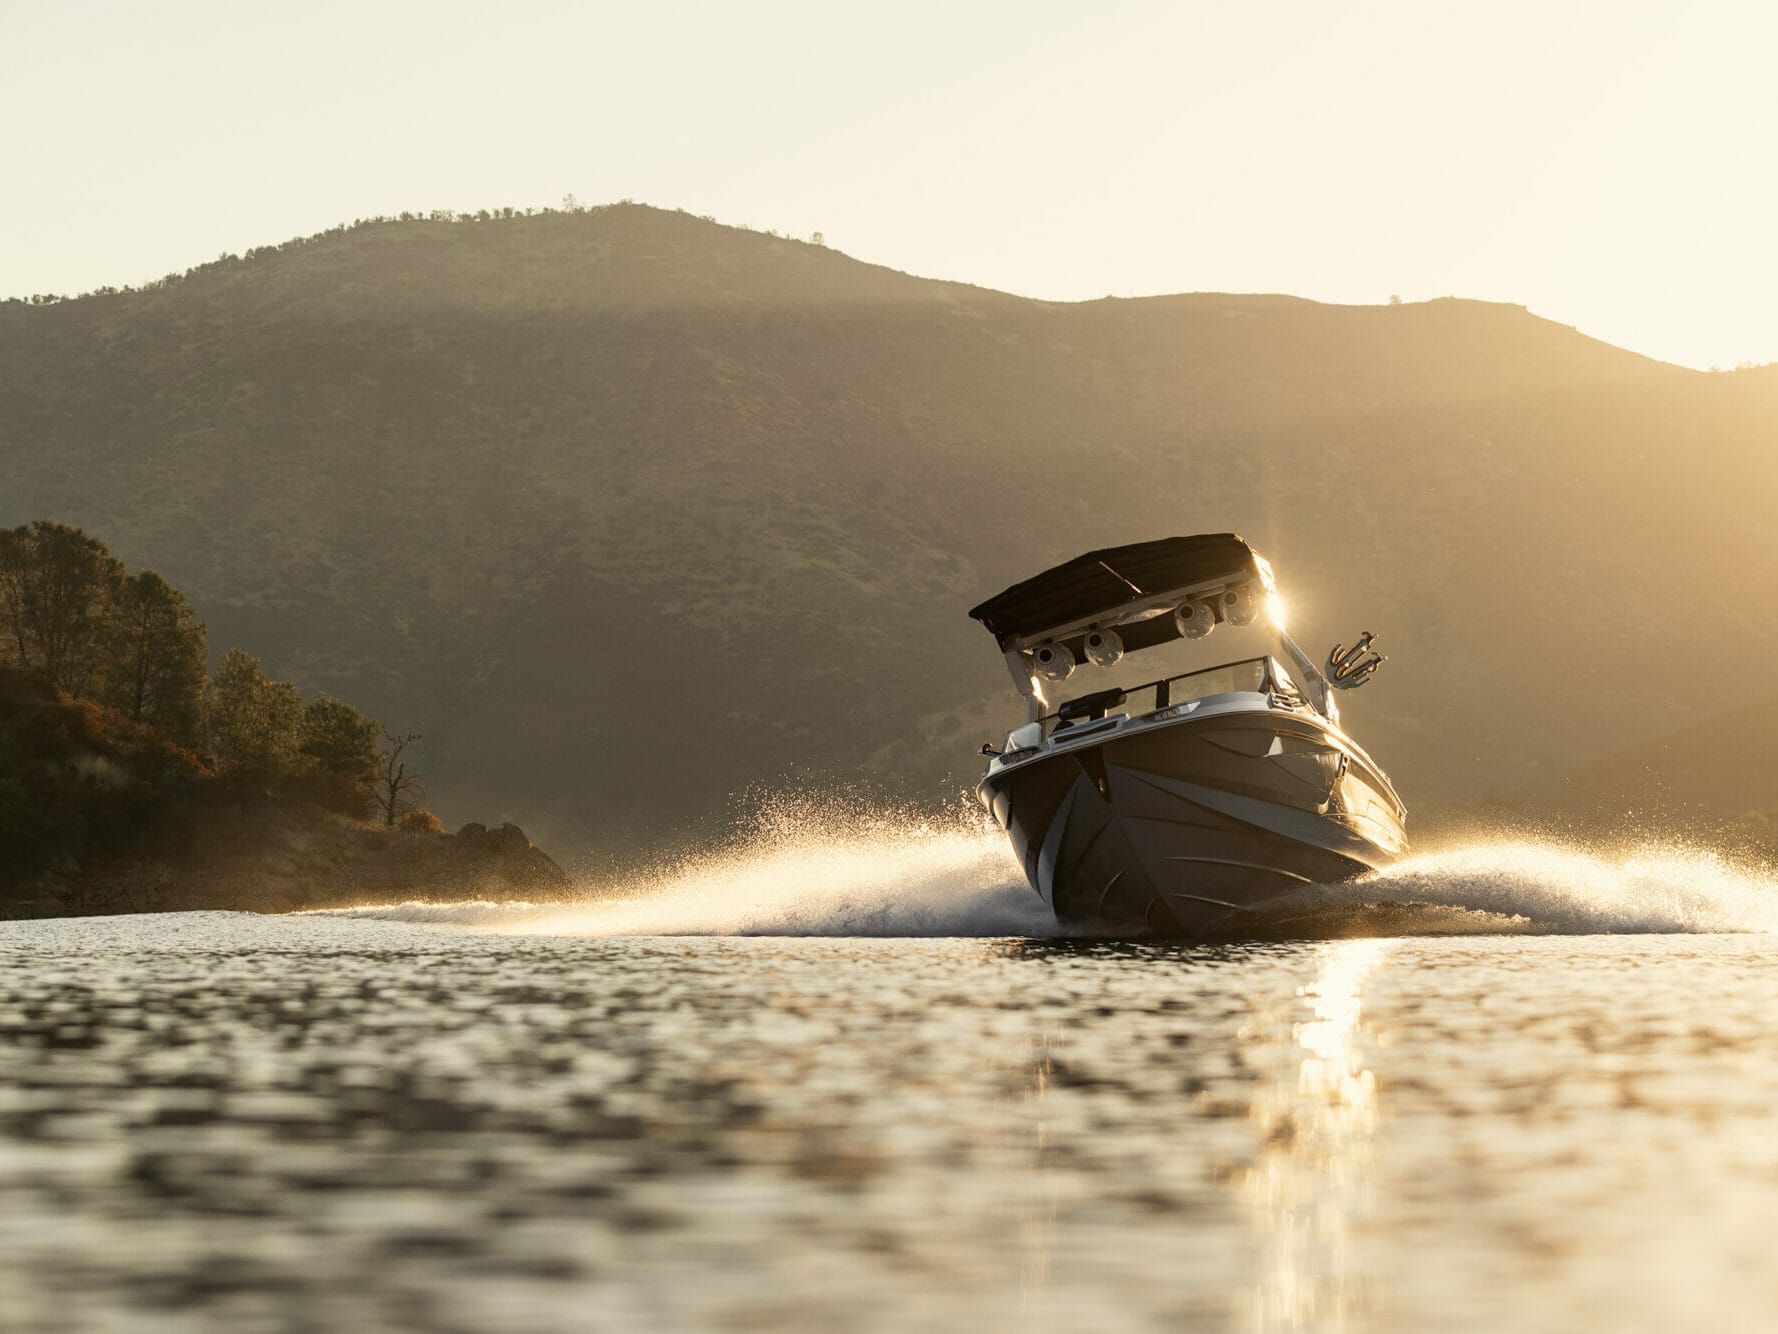 A wakesurf boat on a body of water.